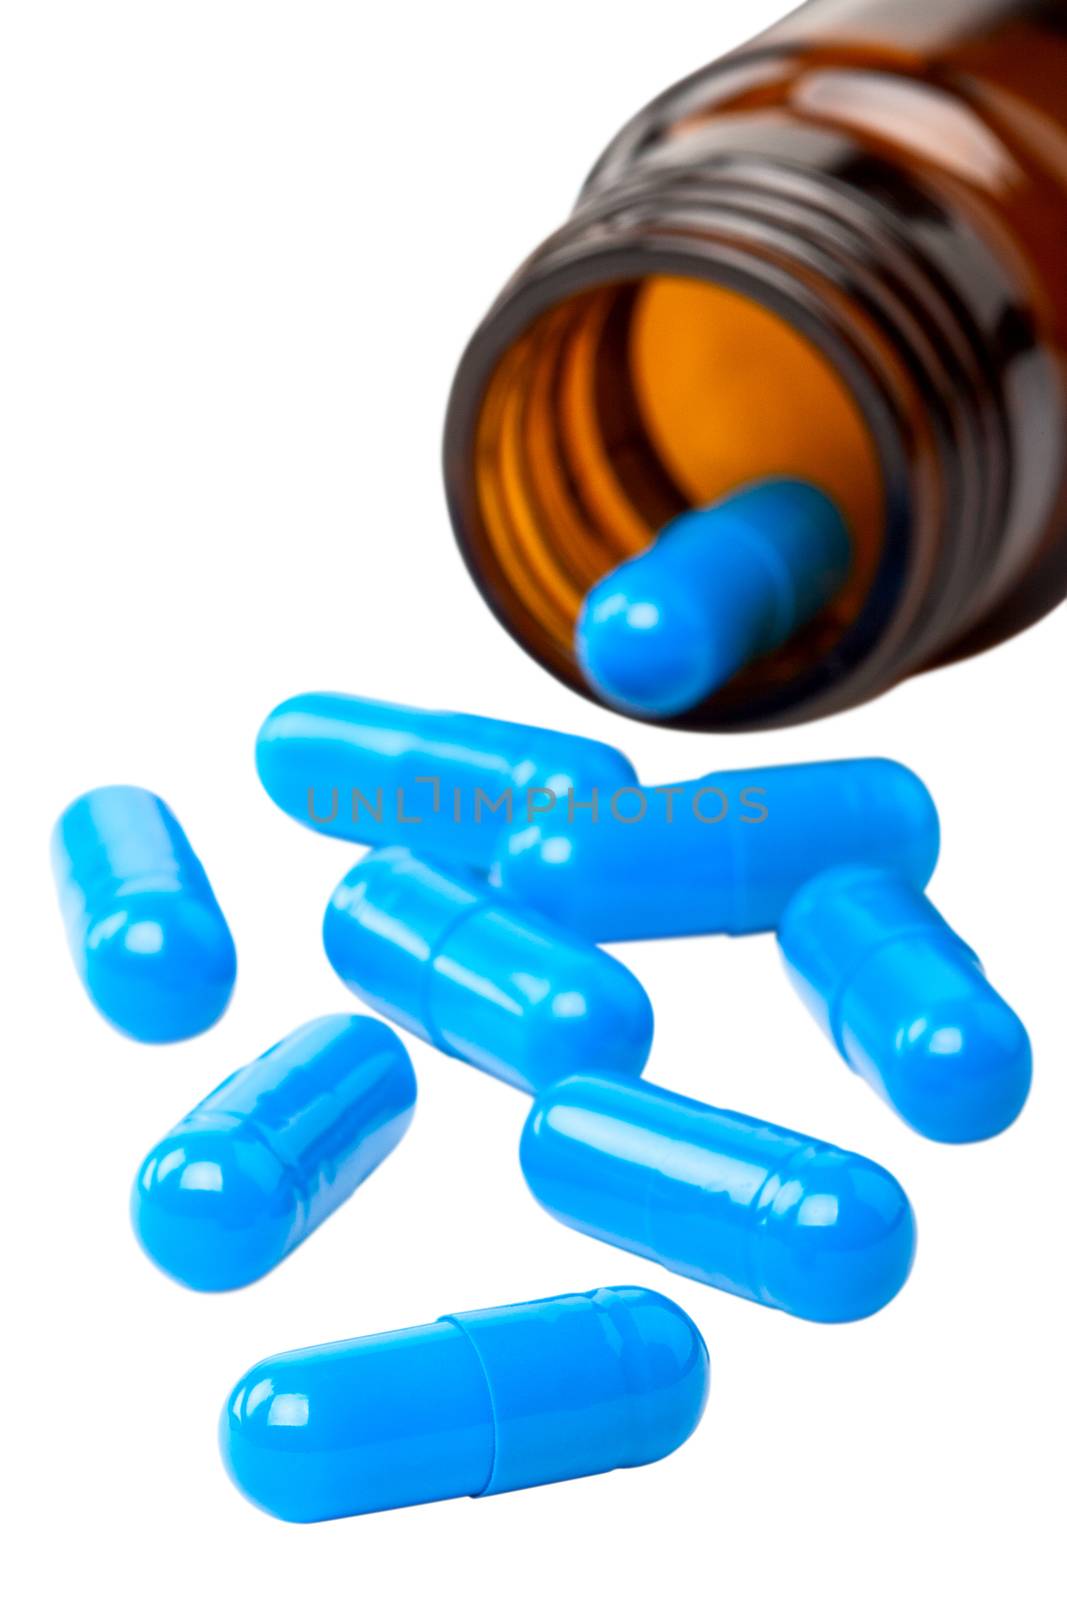 blue capsules on a white background